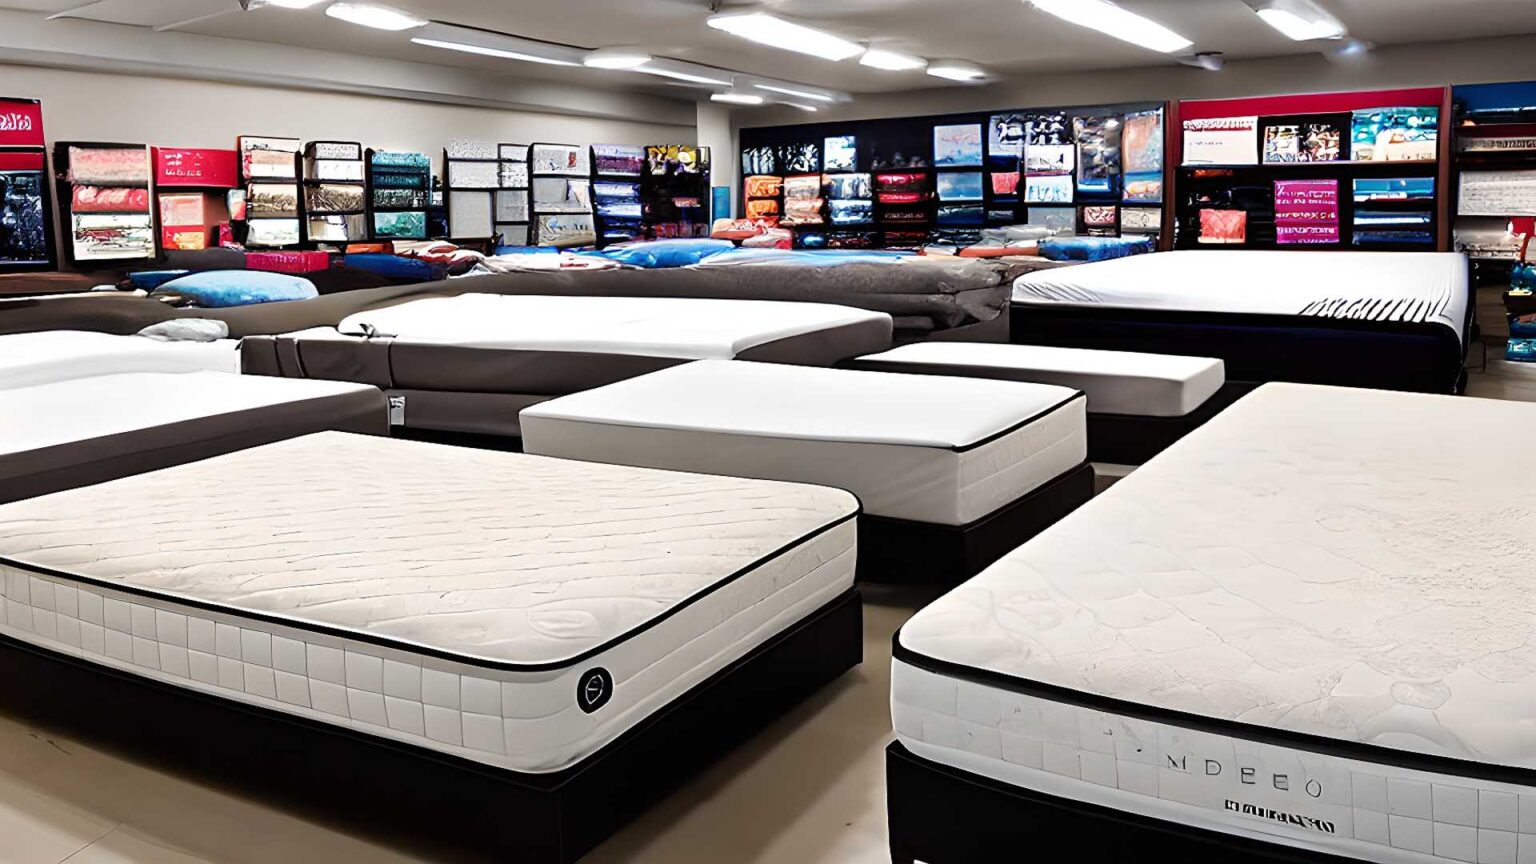 Mattress Stores, mattress dealers, and mattress retailers near me in Elyria, OH